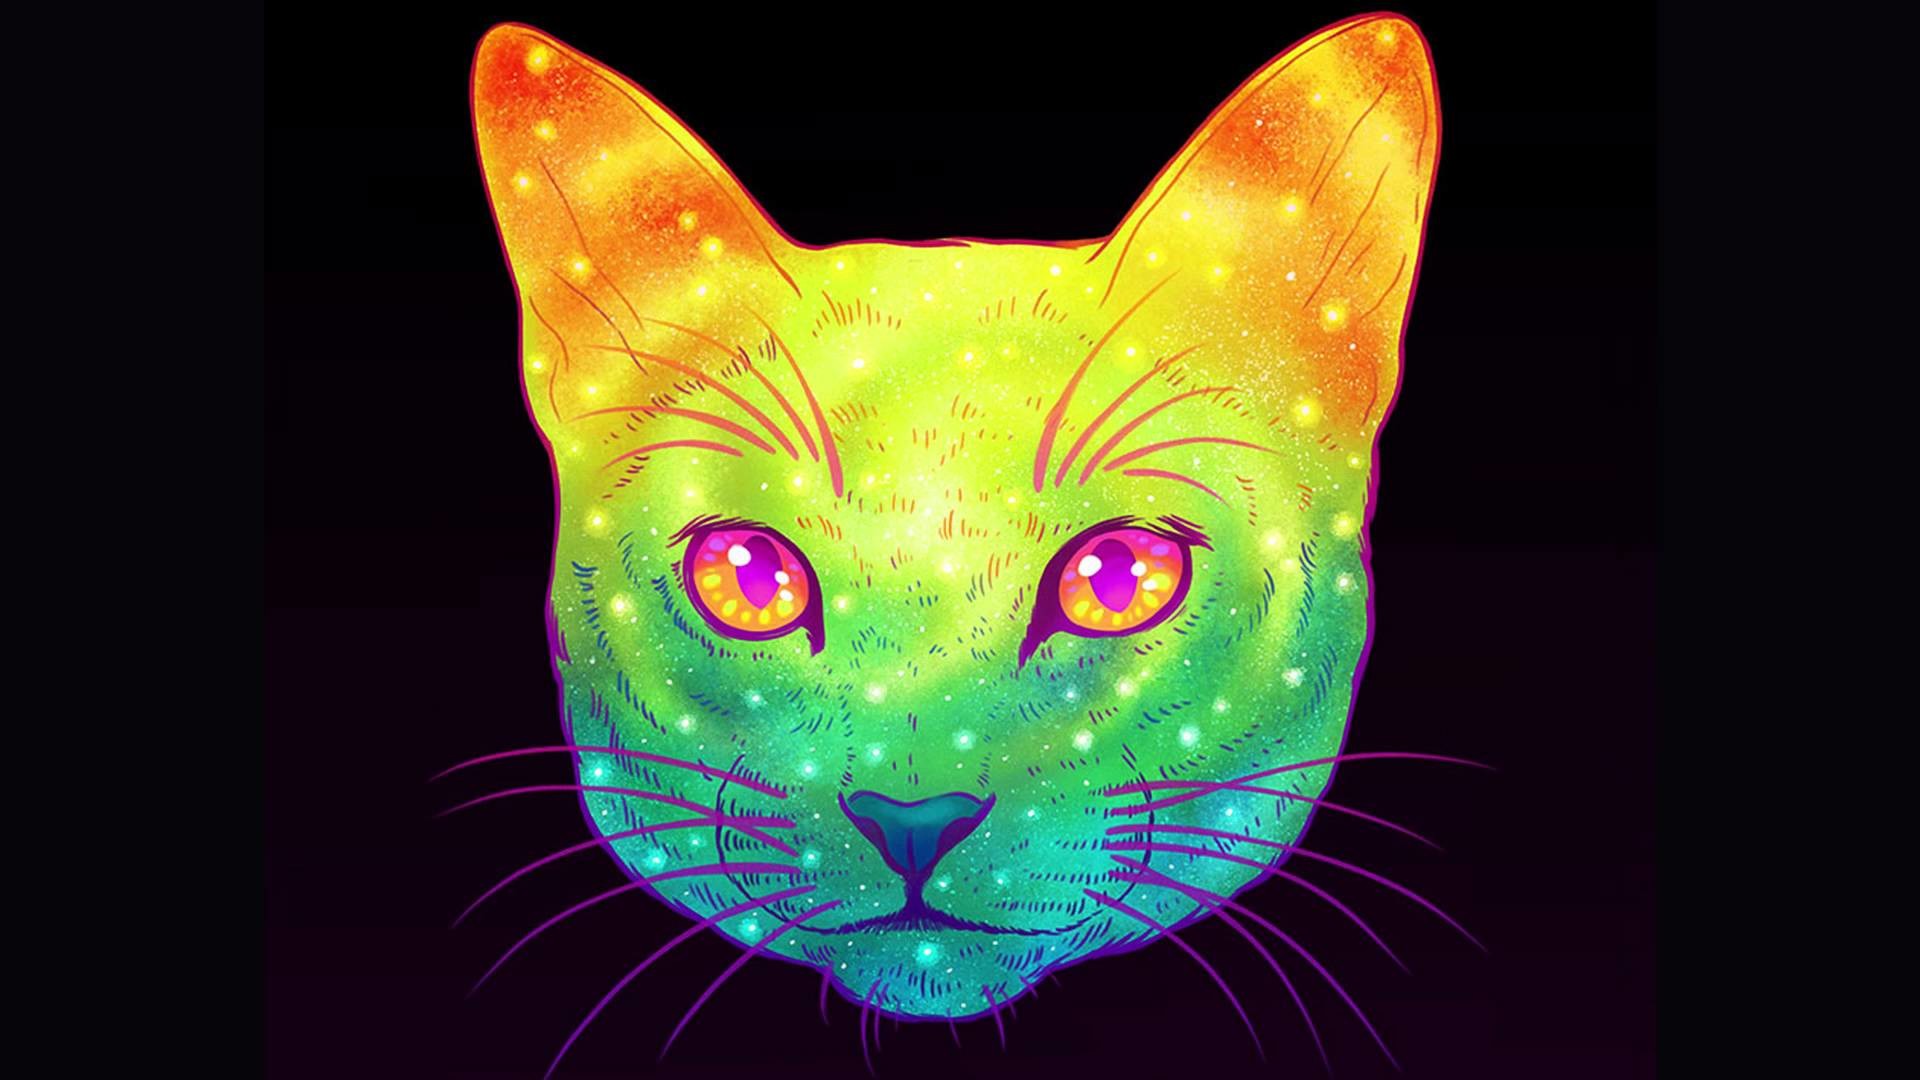 Galactic Cats Psychedelic Illustrations Merge Cats And Space